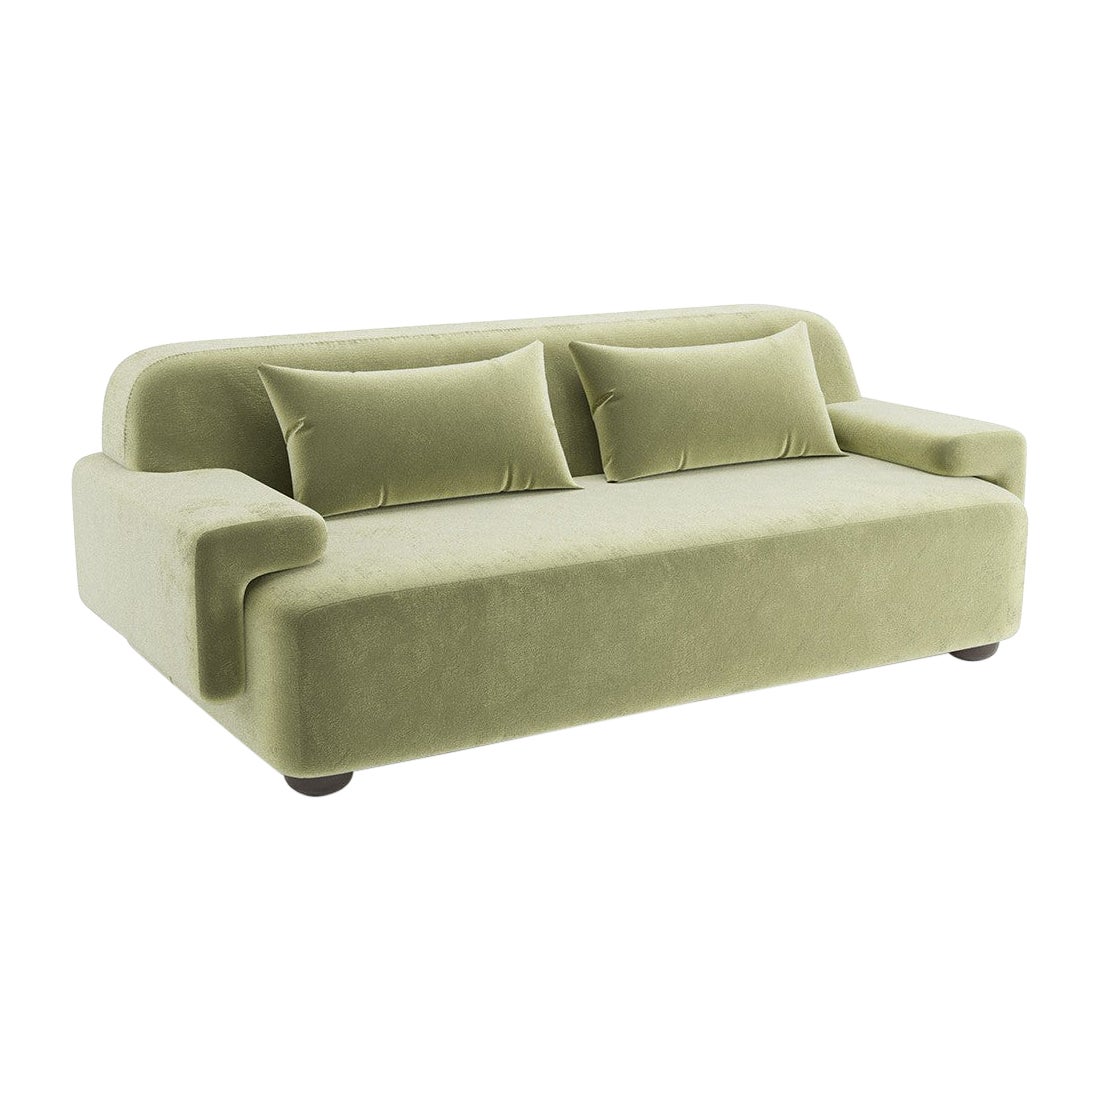 Popus Editions Lena 3 Seater Sofa in Almond Green Como Velvet Upholstery For Sale